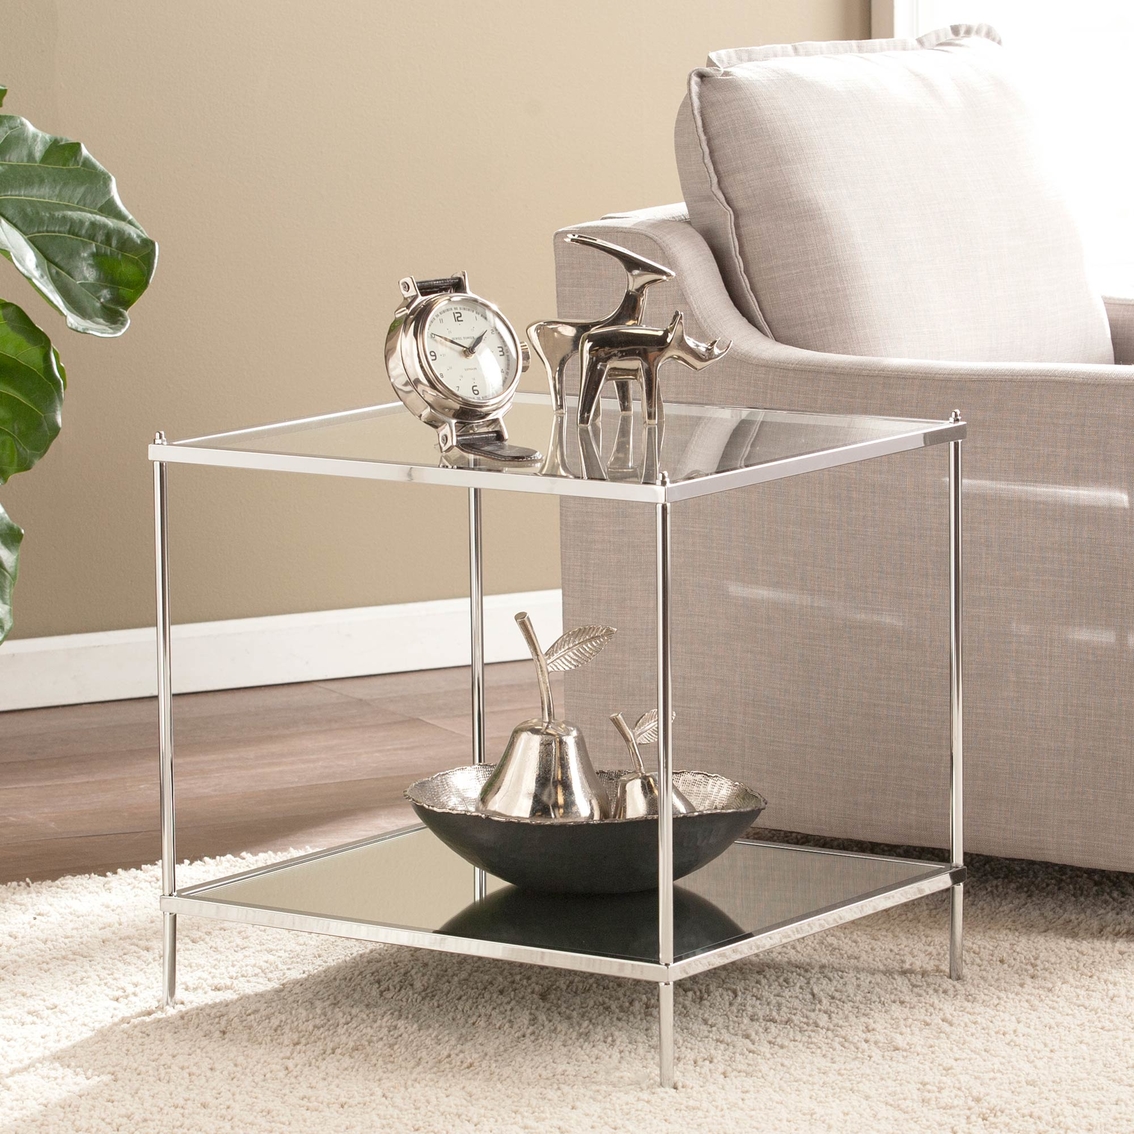 Southern Enterprises Mirrored End Table - Image 4 of 4